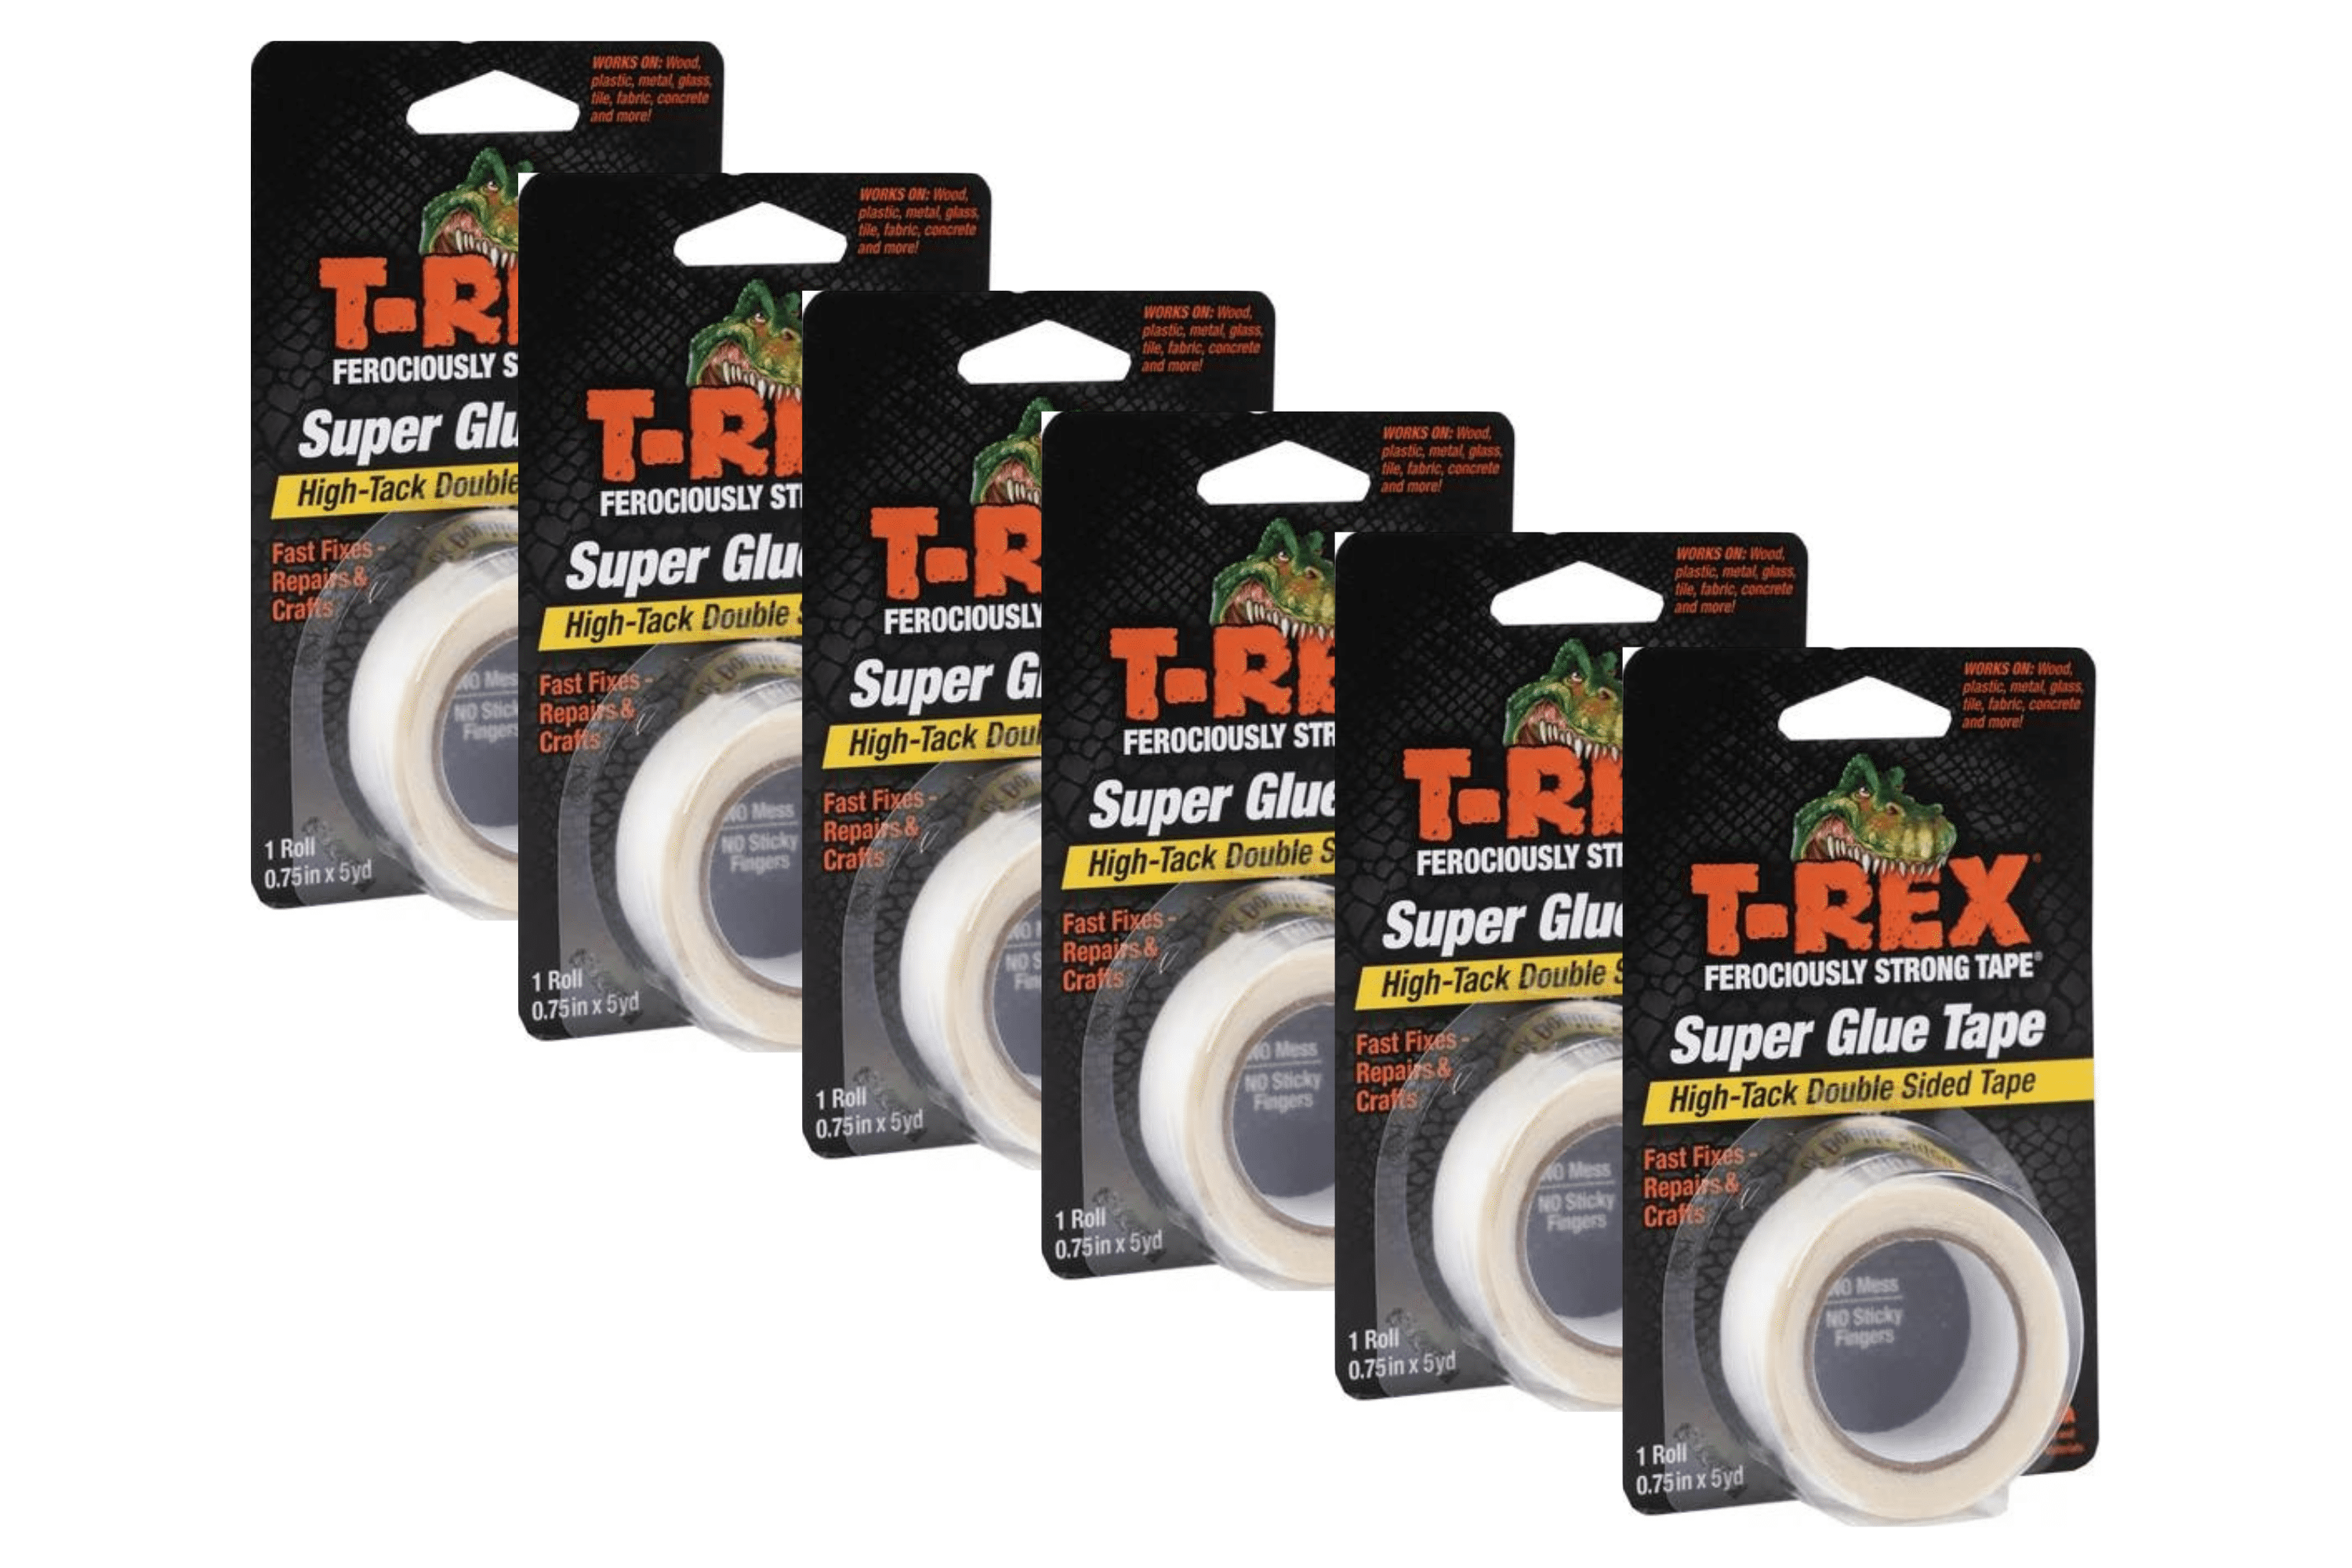 T-Rex 286853 7.5 mil Double Sided Clear Super Glue Tape - 0.75